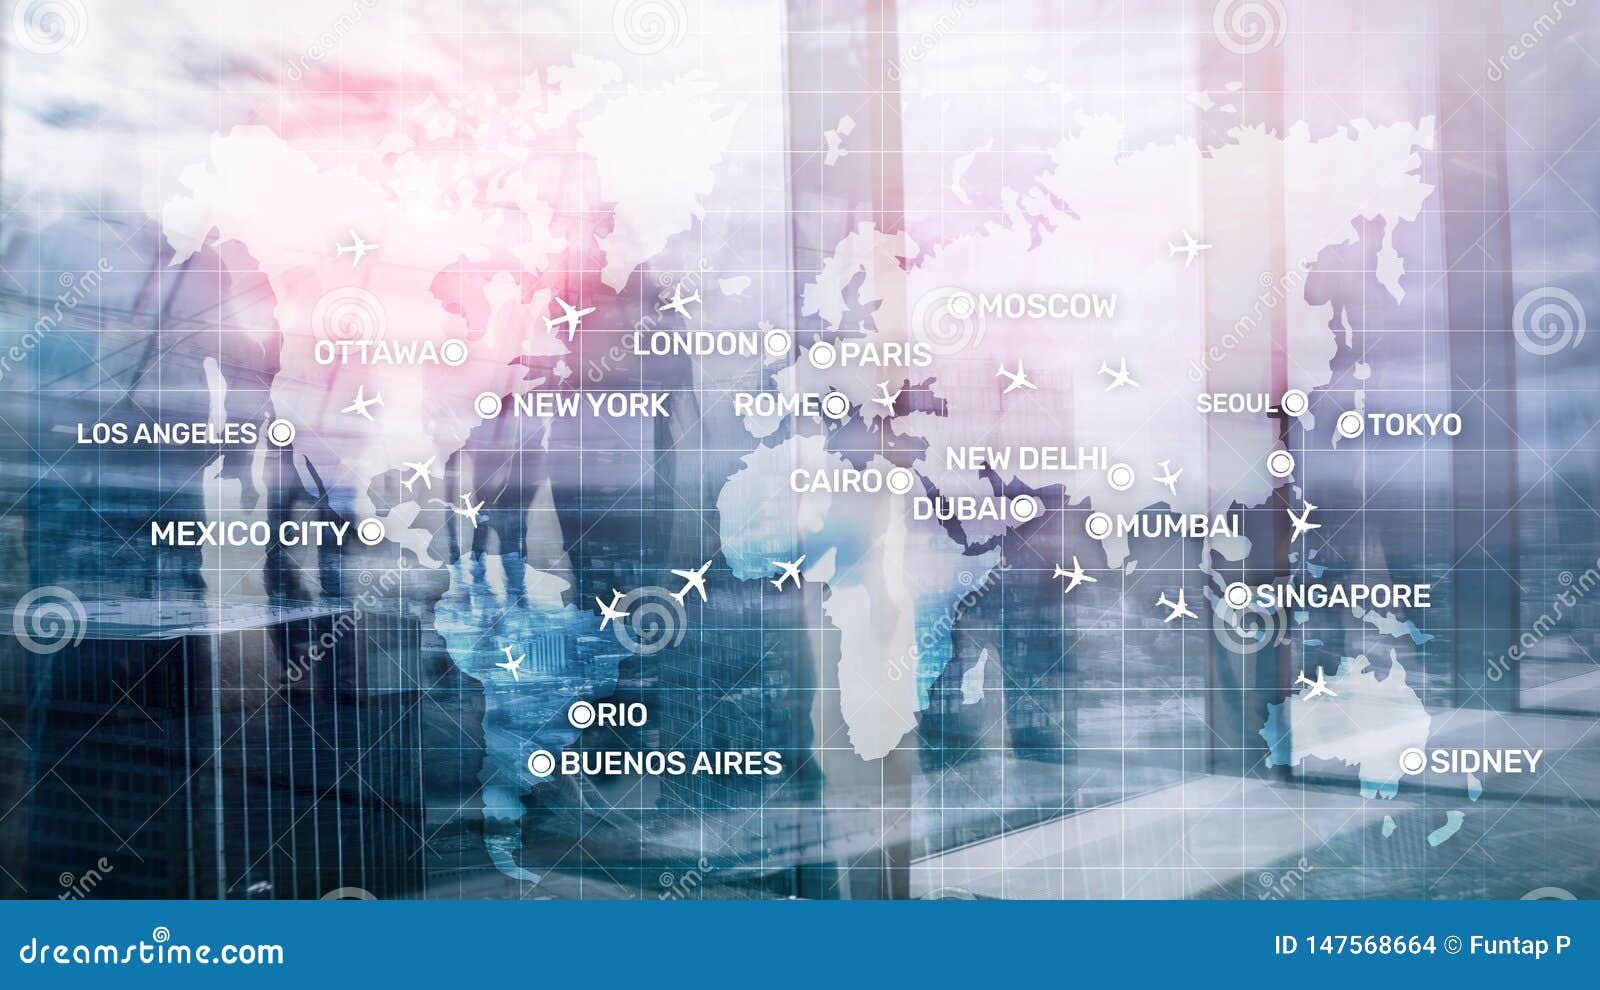 global aviation abstract background with planes and city names on a map. business travel transportation concept.